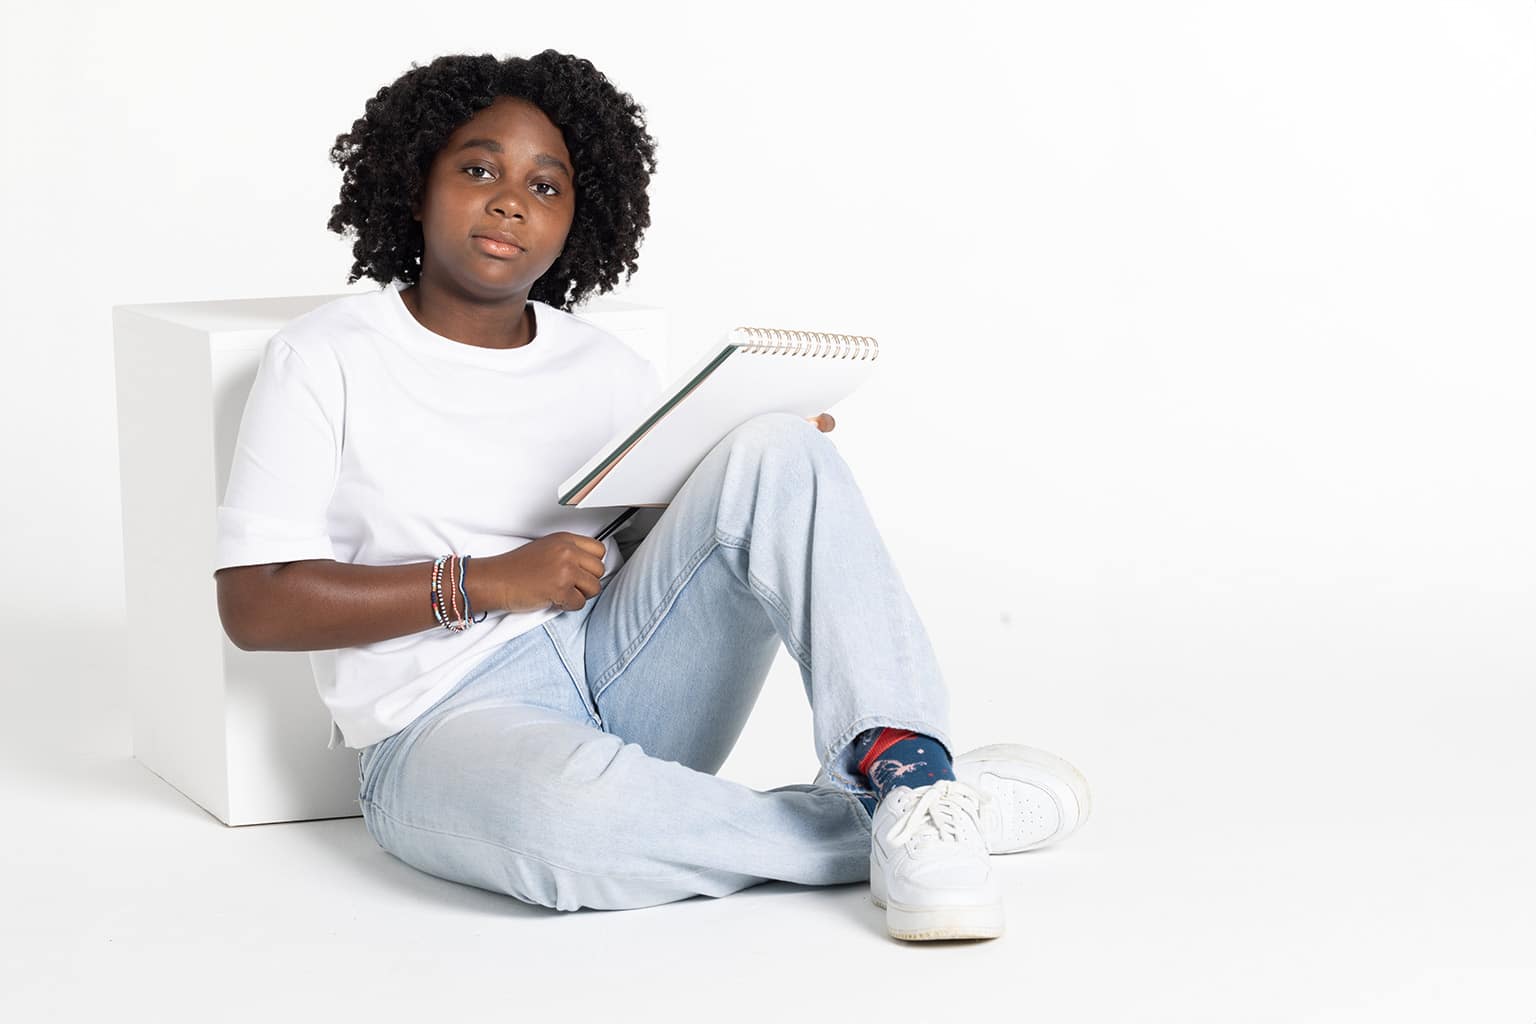 Middle-school aged black girl sitting on the floor with a notebook